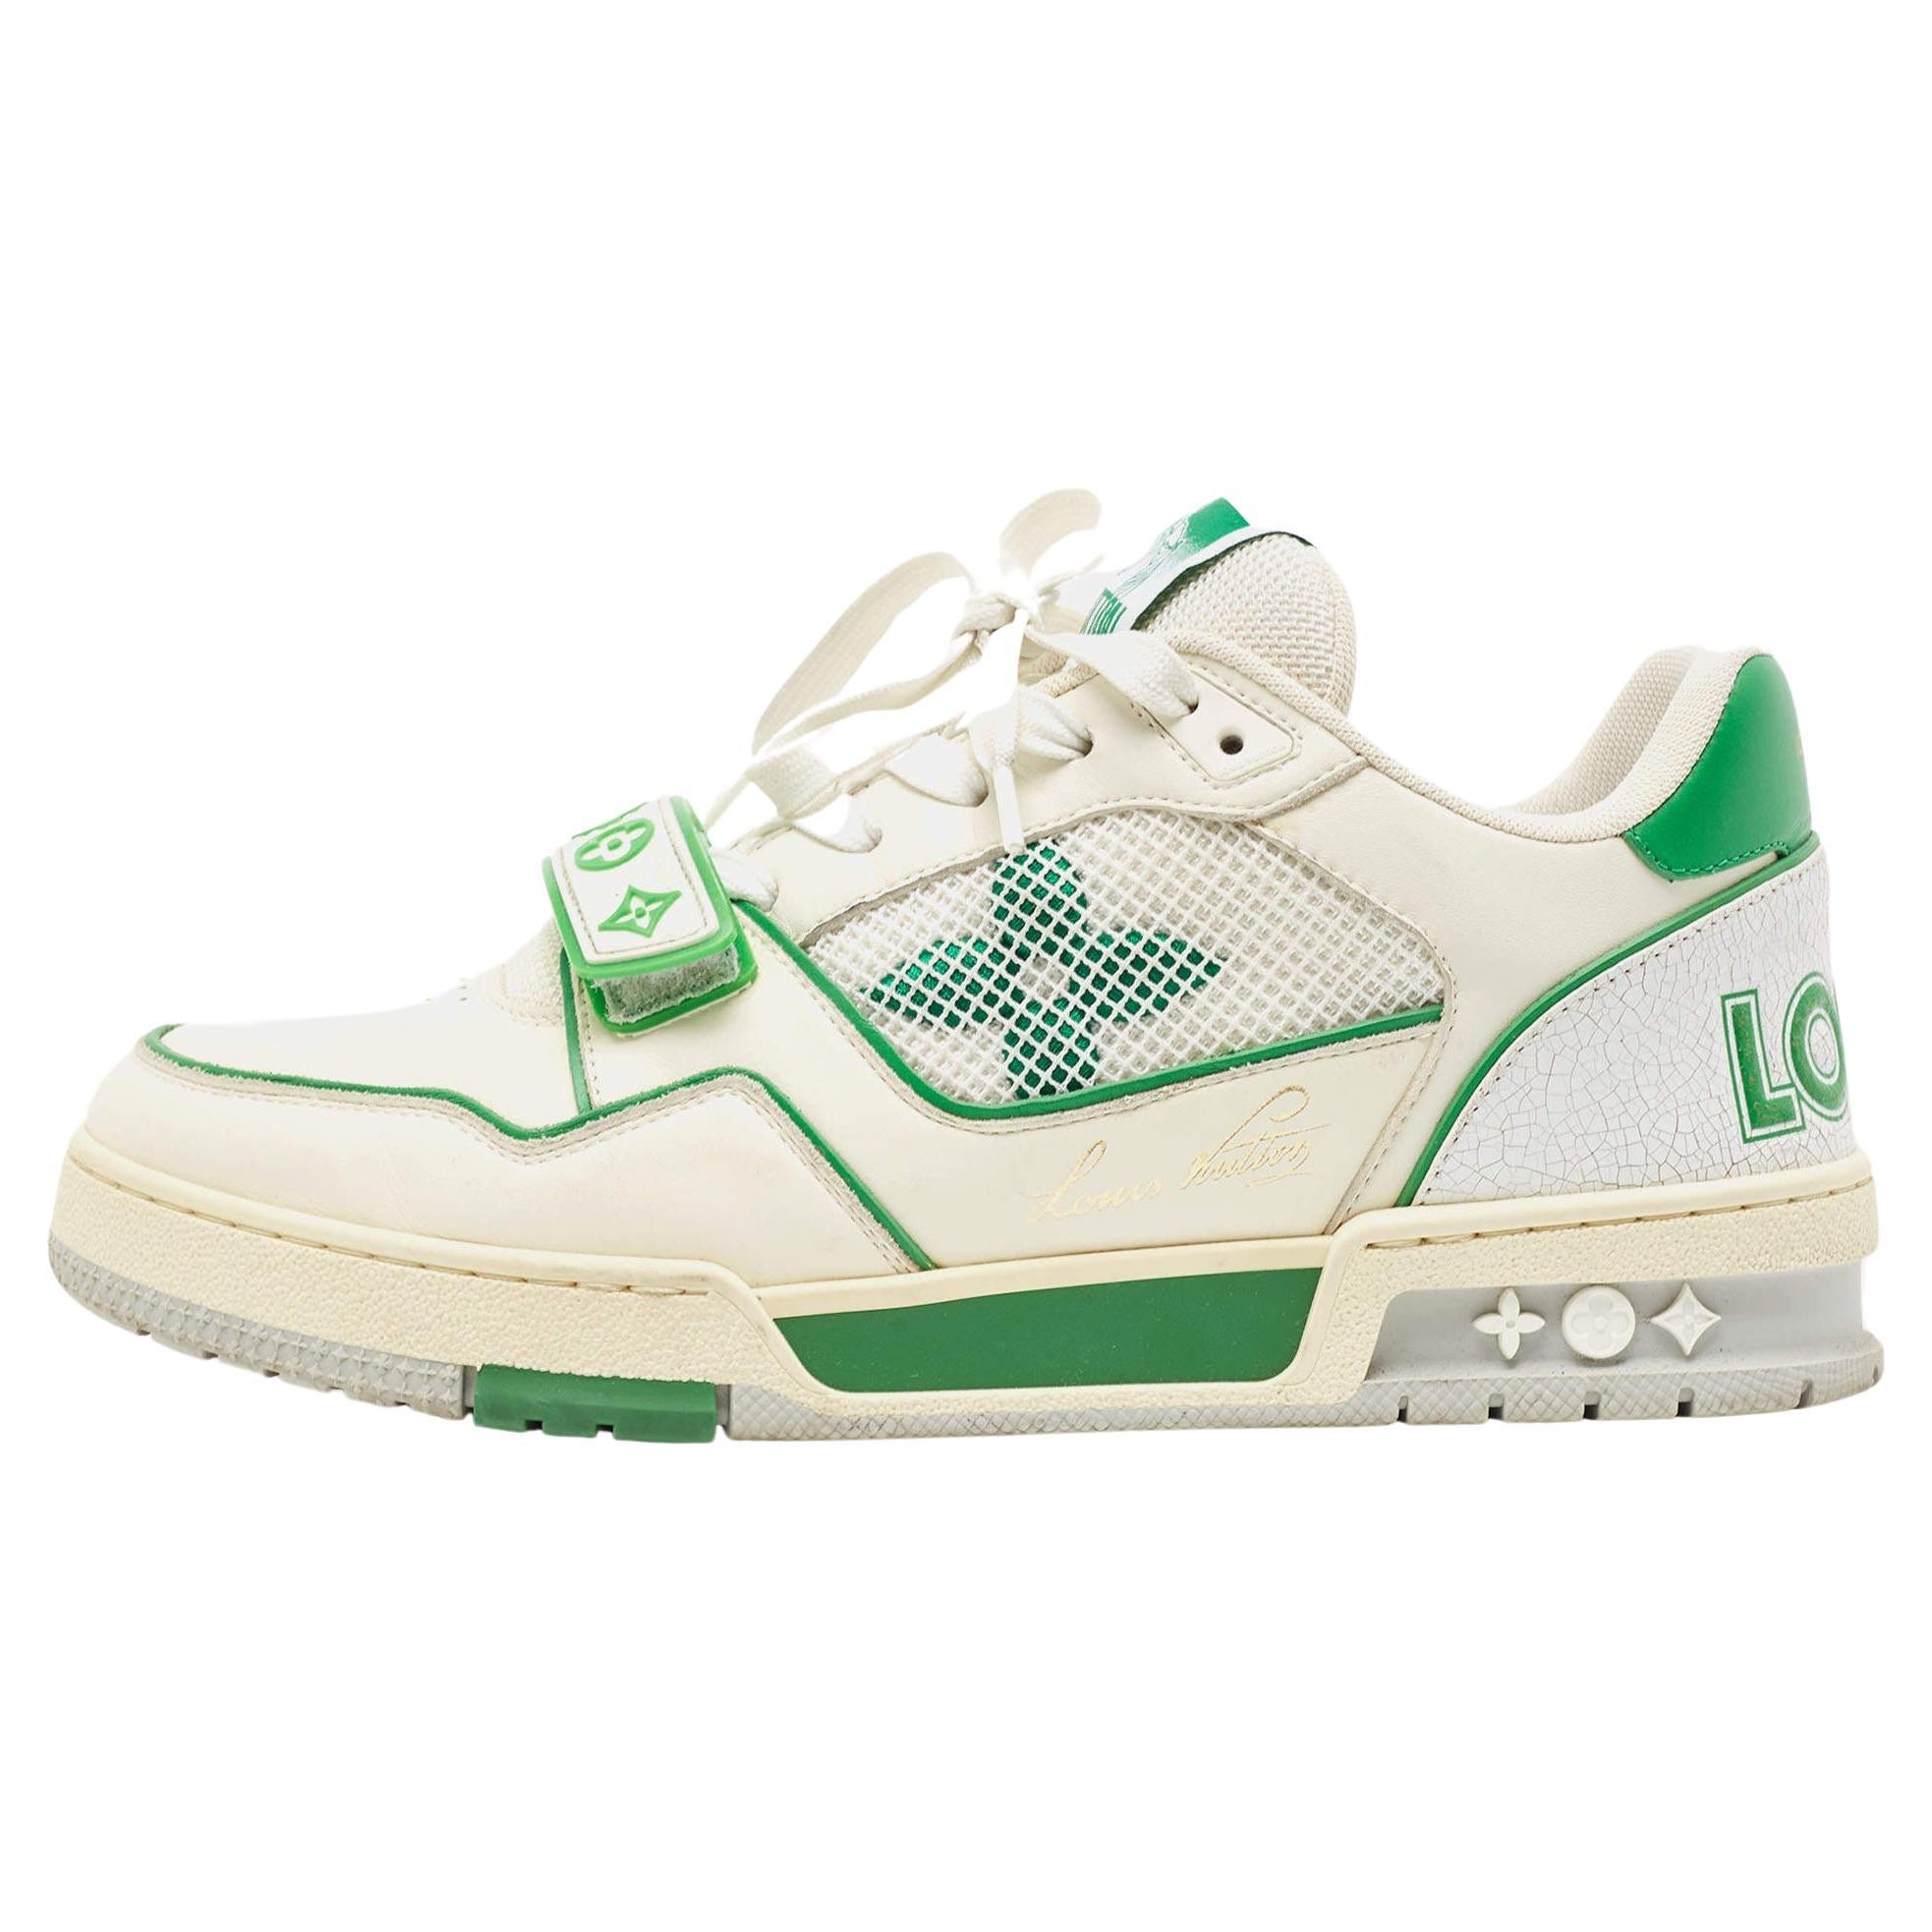 Louis Vuitton White/Green Leather and Mesh Low Top Sneakers Size 40